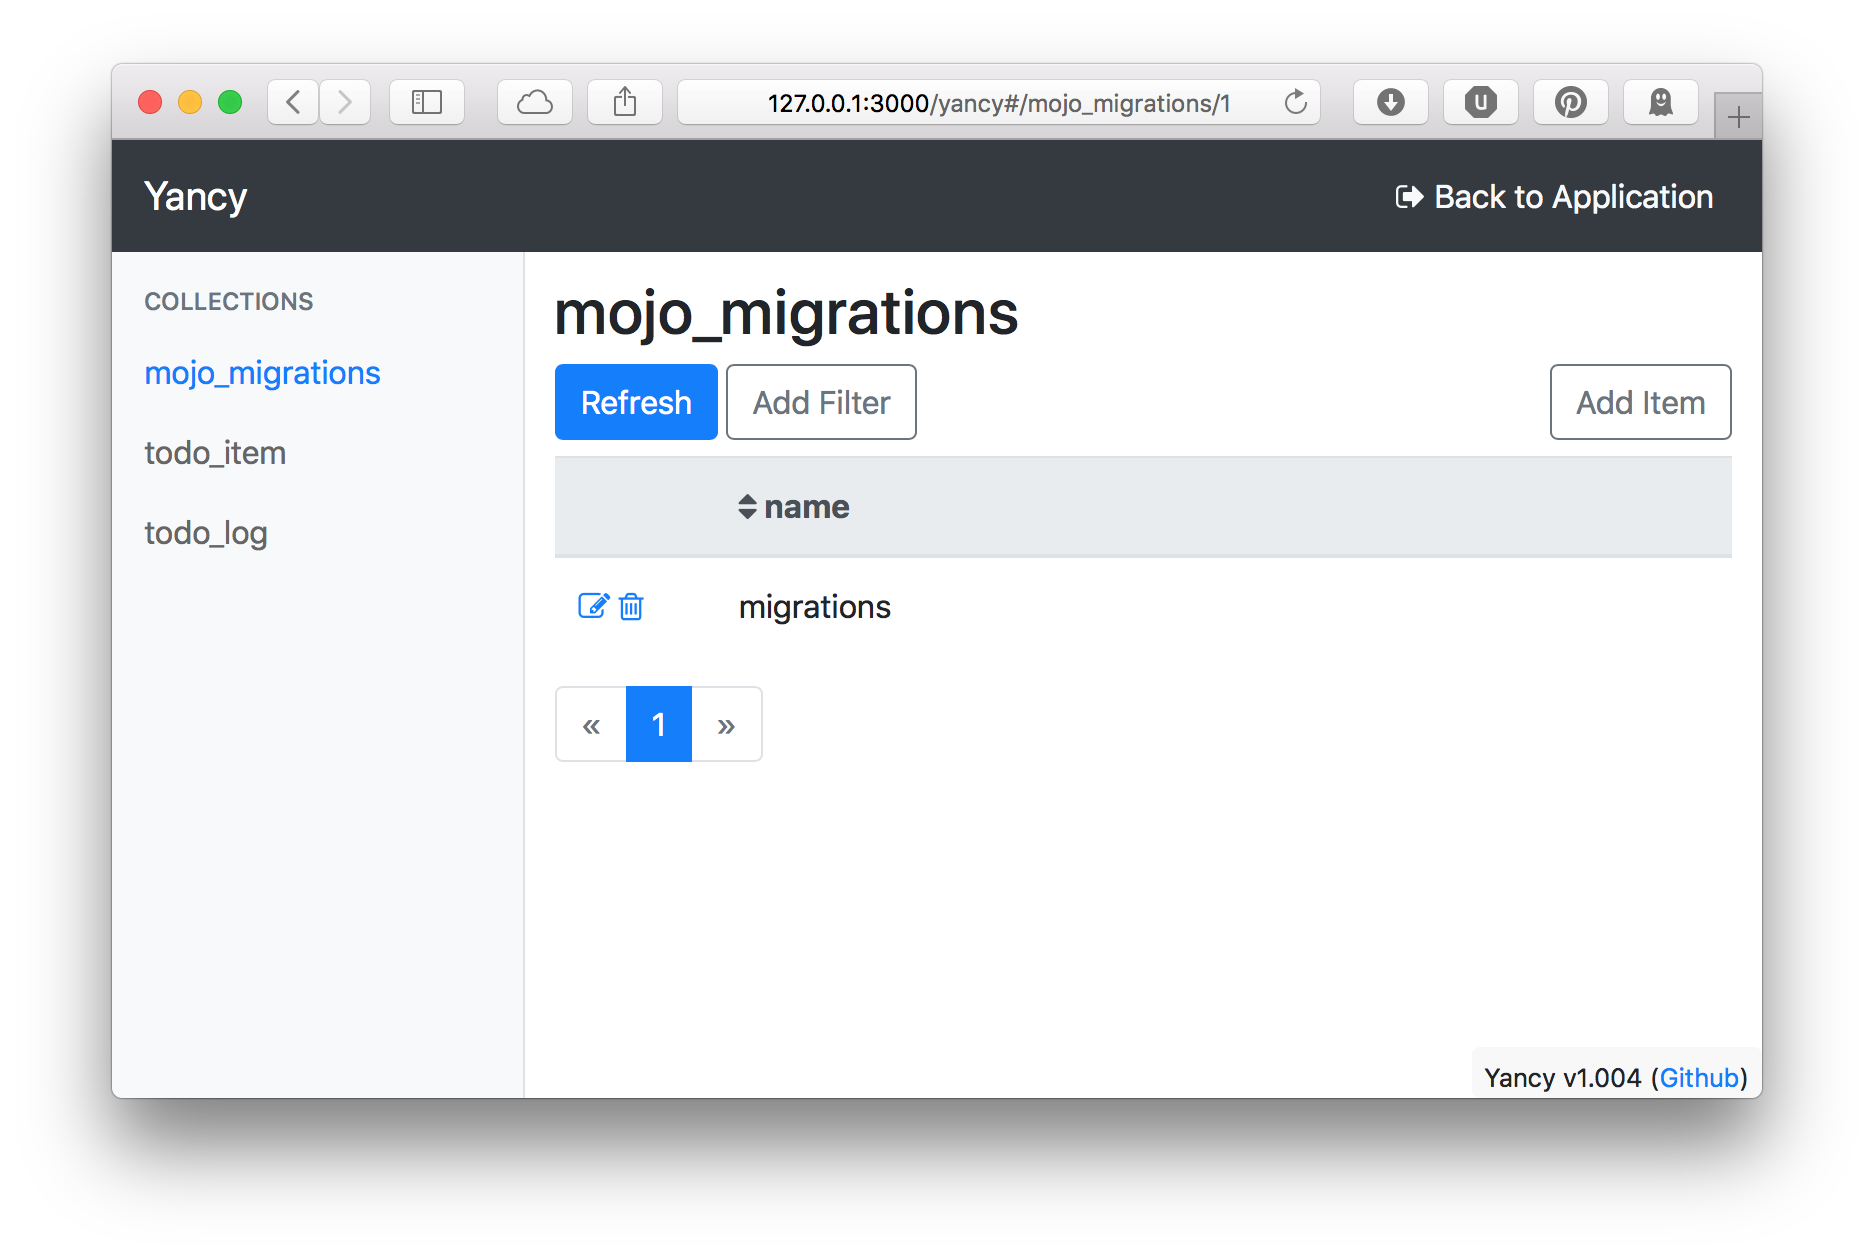 The initial Yancy editor showing the mojo_migrations
table